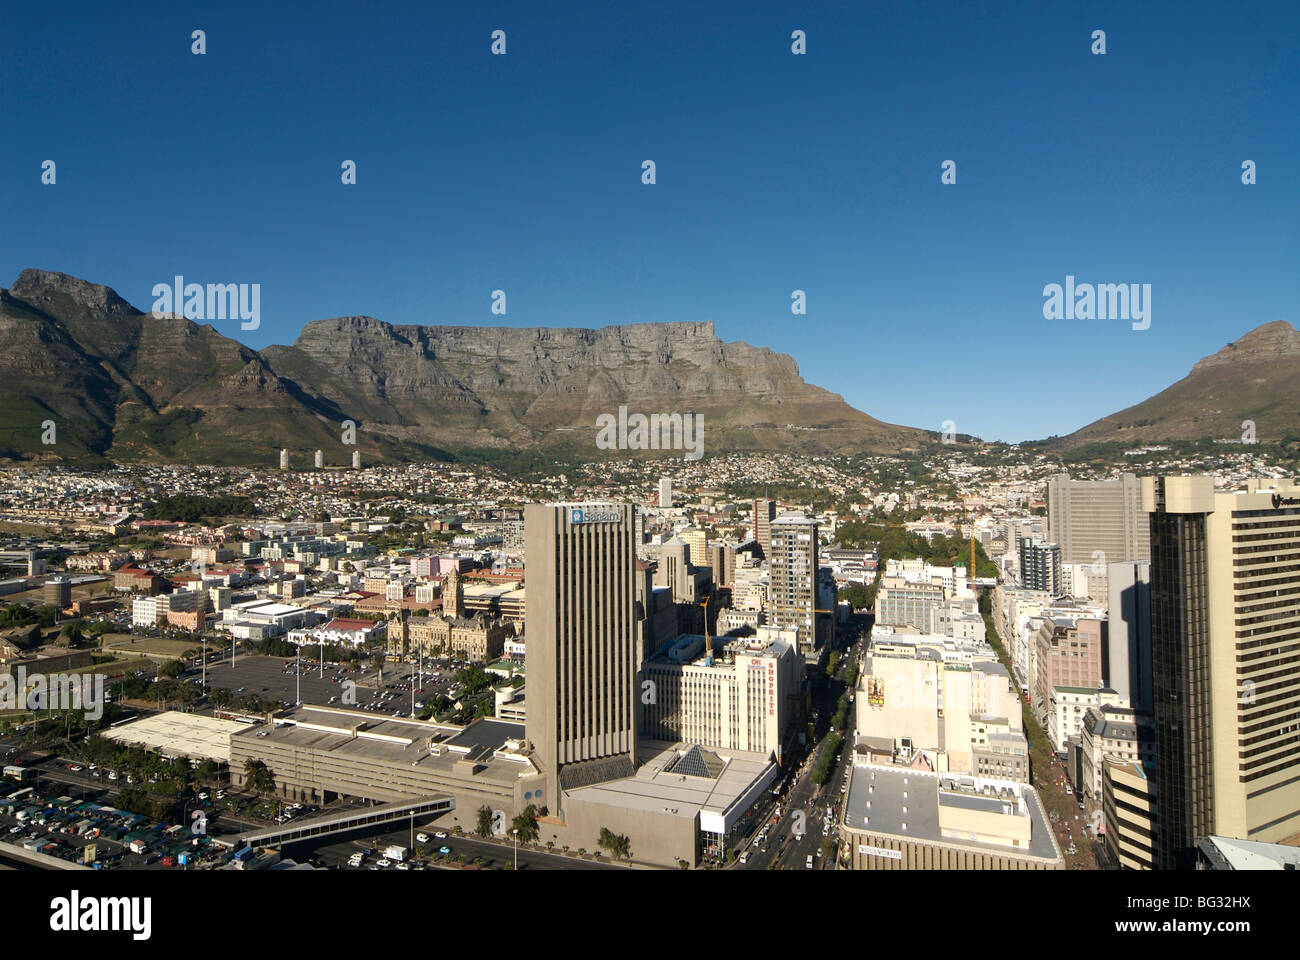 A view of Cape Town CBD and Table Mountain from ABSA building, Adderley St, South Africa Stock Photo